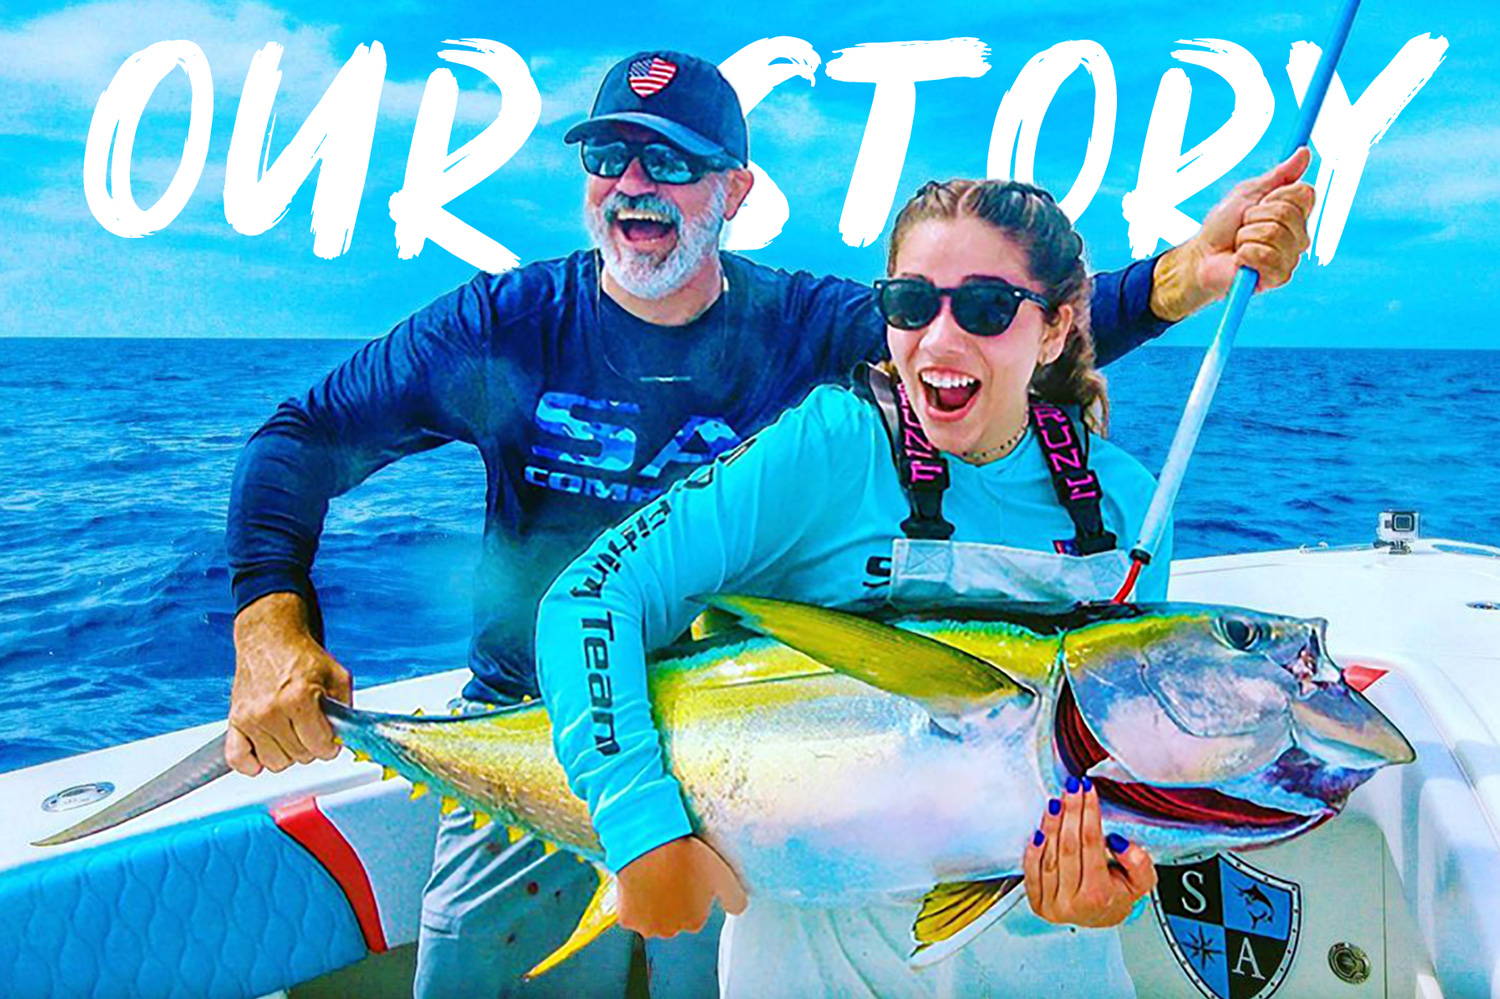 Our Story. A lady and a man holding up a very large fish together. They are both wearing SA Company performance shirts.